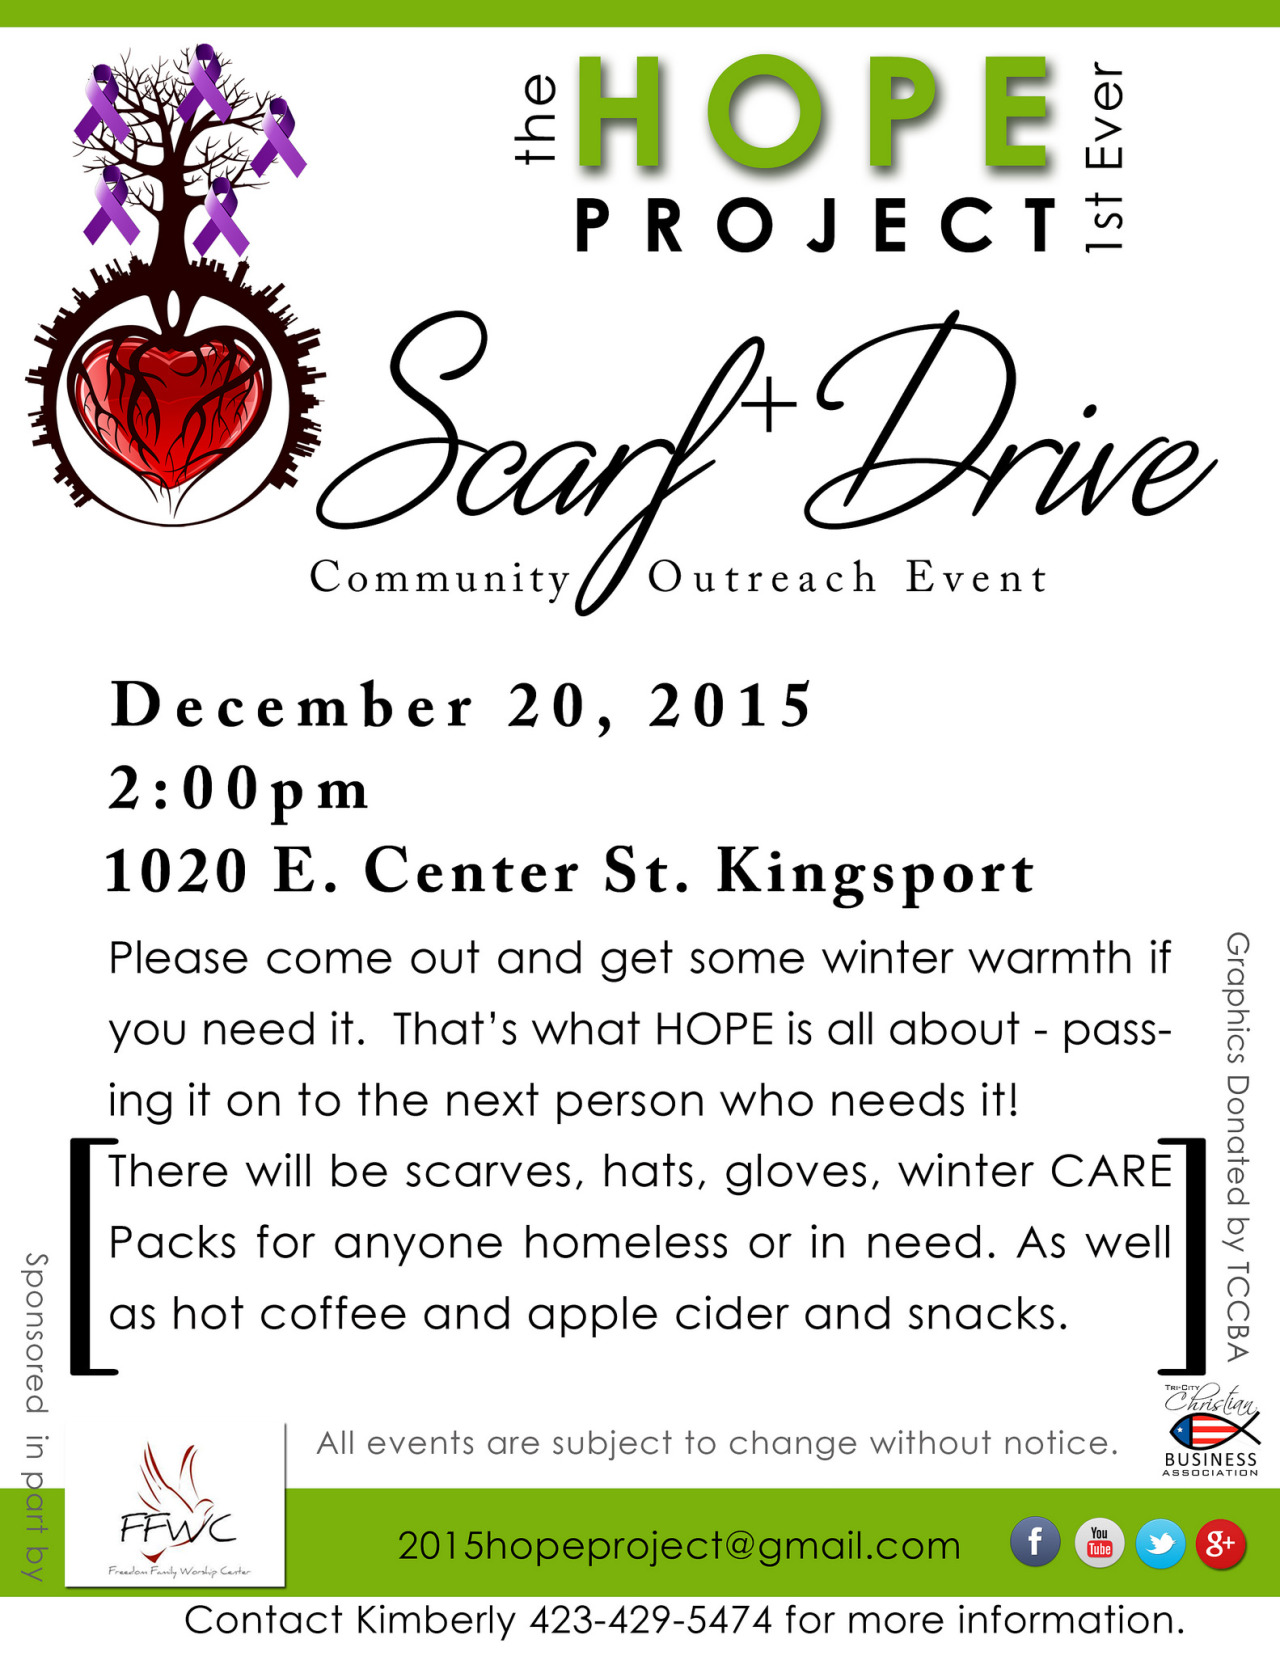 theHOPE project Scarf Drive by deZengo
Via Flickr:
December 20 - 2pm 1020 E. Center St. KPT ~~~~~~~~~~~~~~ Please come out and get some winter warmth if you need it. That’s what HOPE is all about - passing it on to the next person who needs it! There...